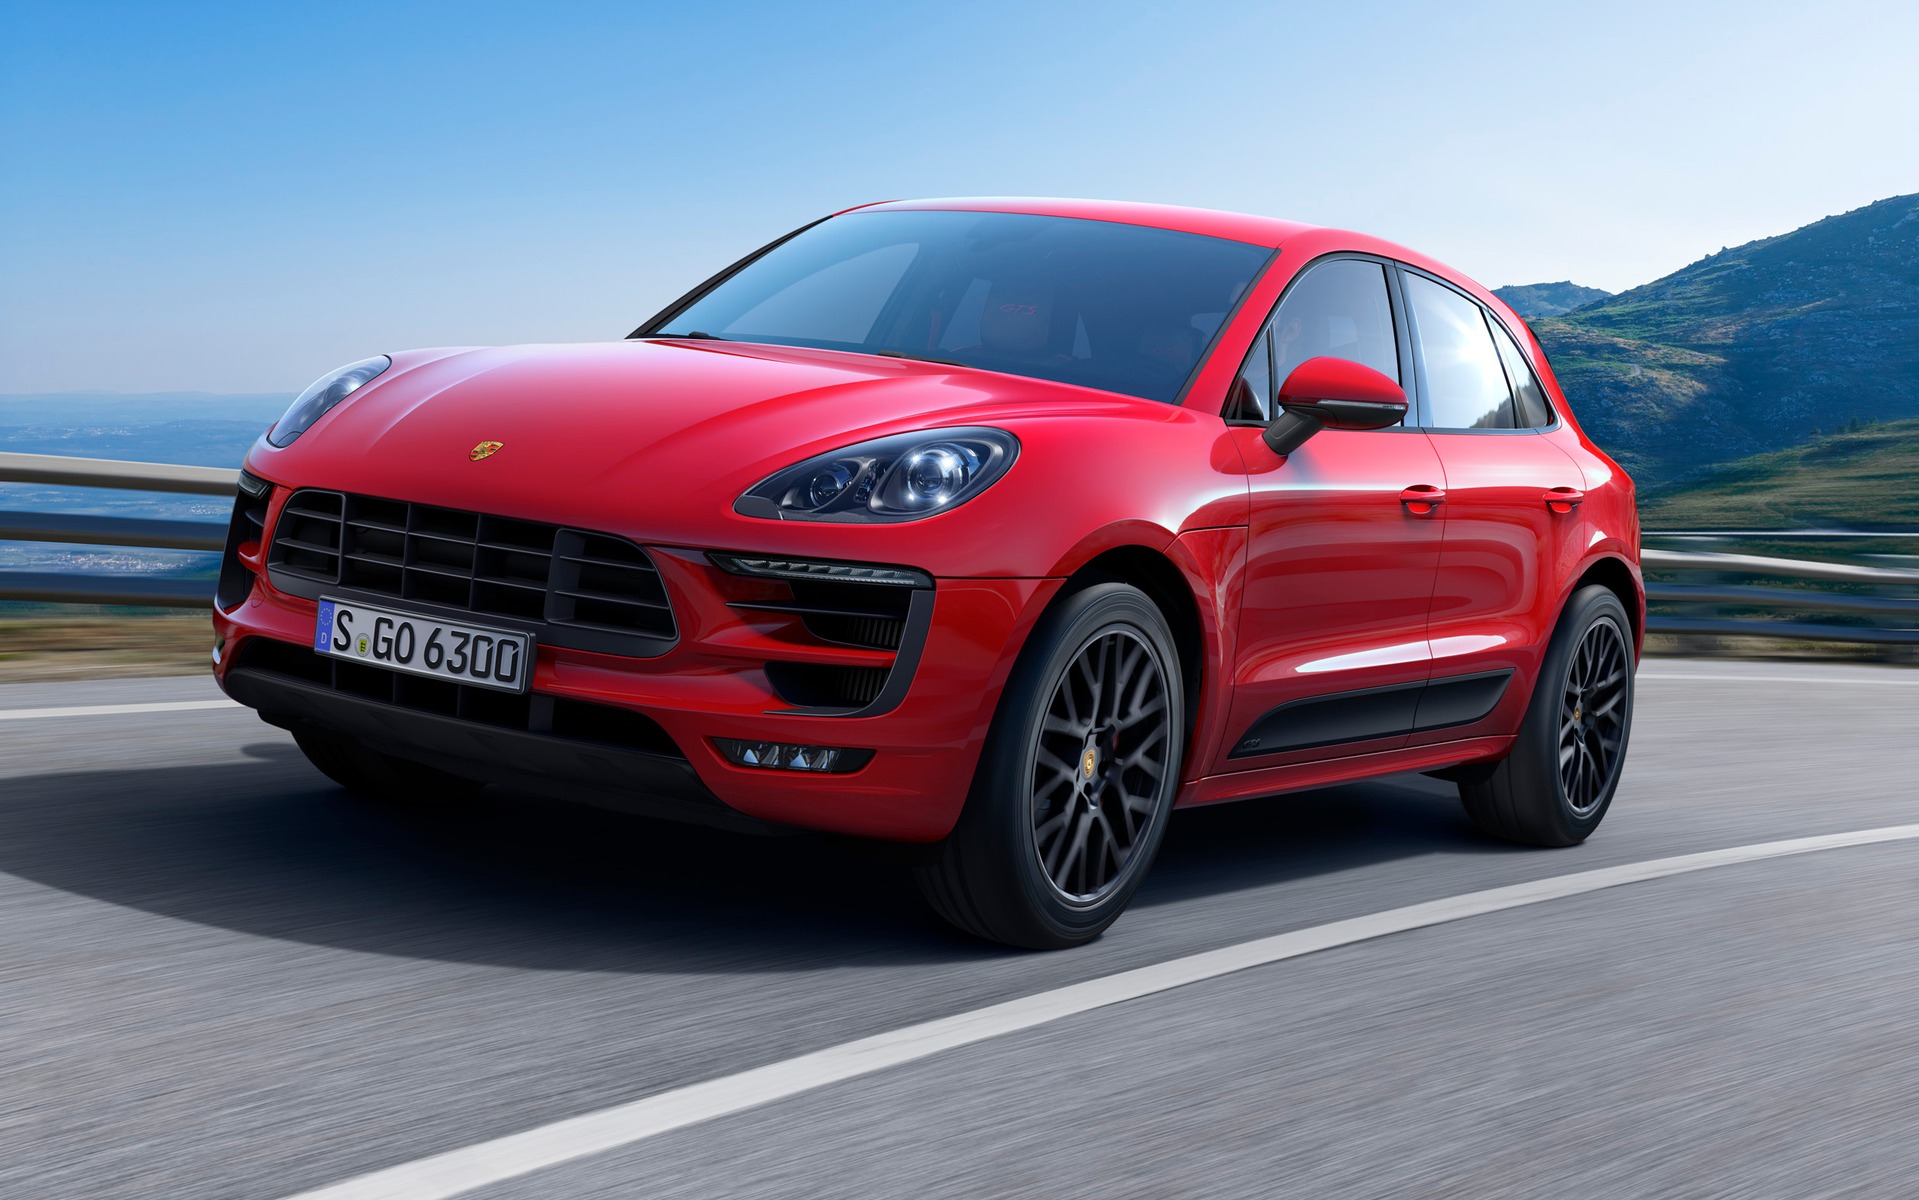 The Macan S and Turbo came out first, and the GTS is being added for 2017.